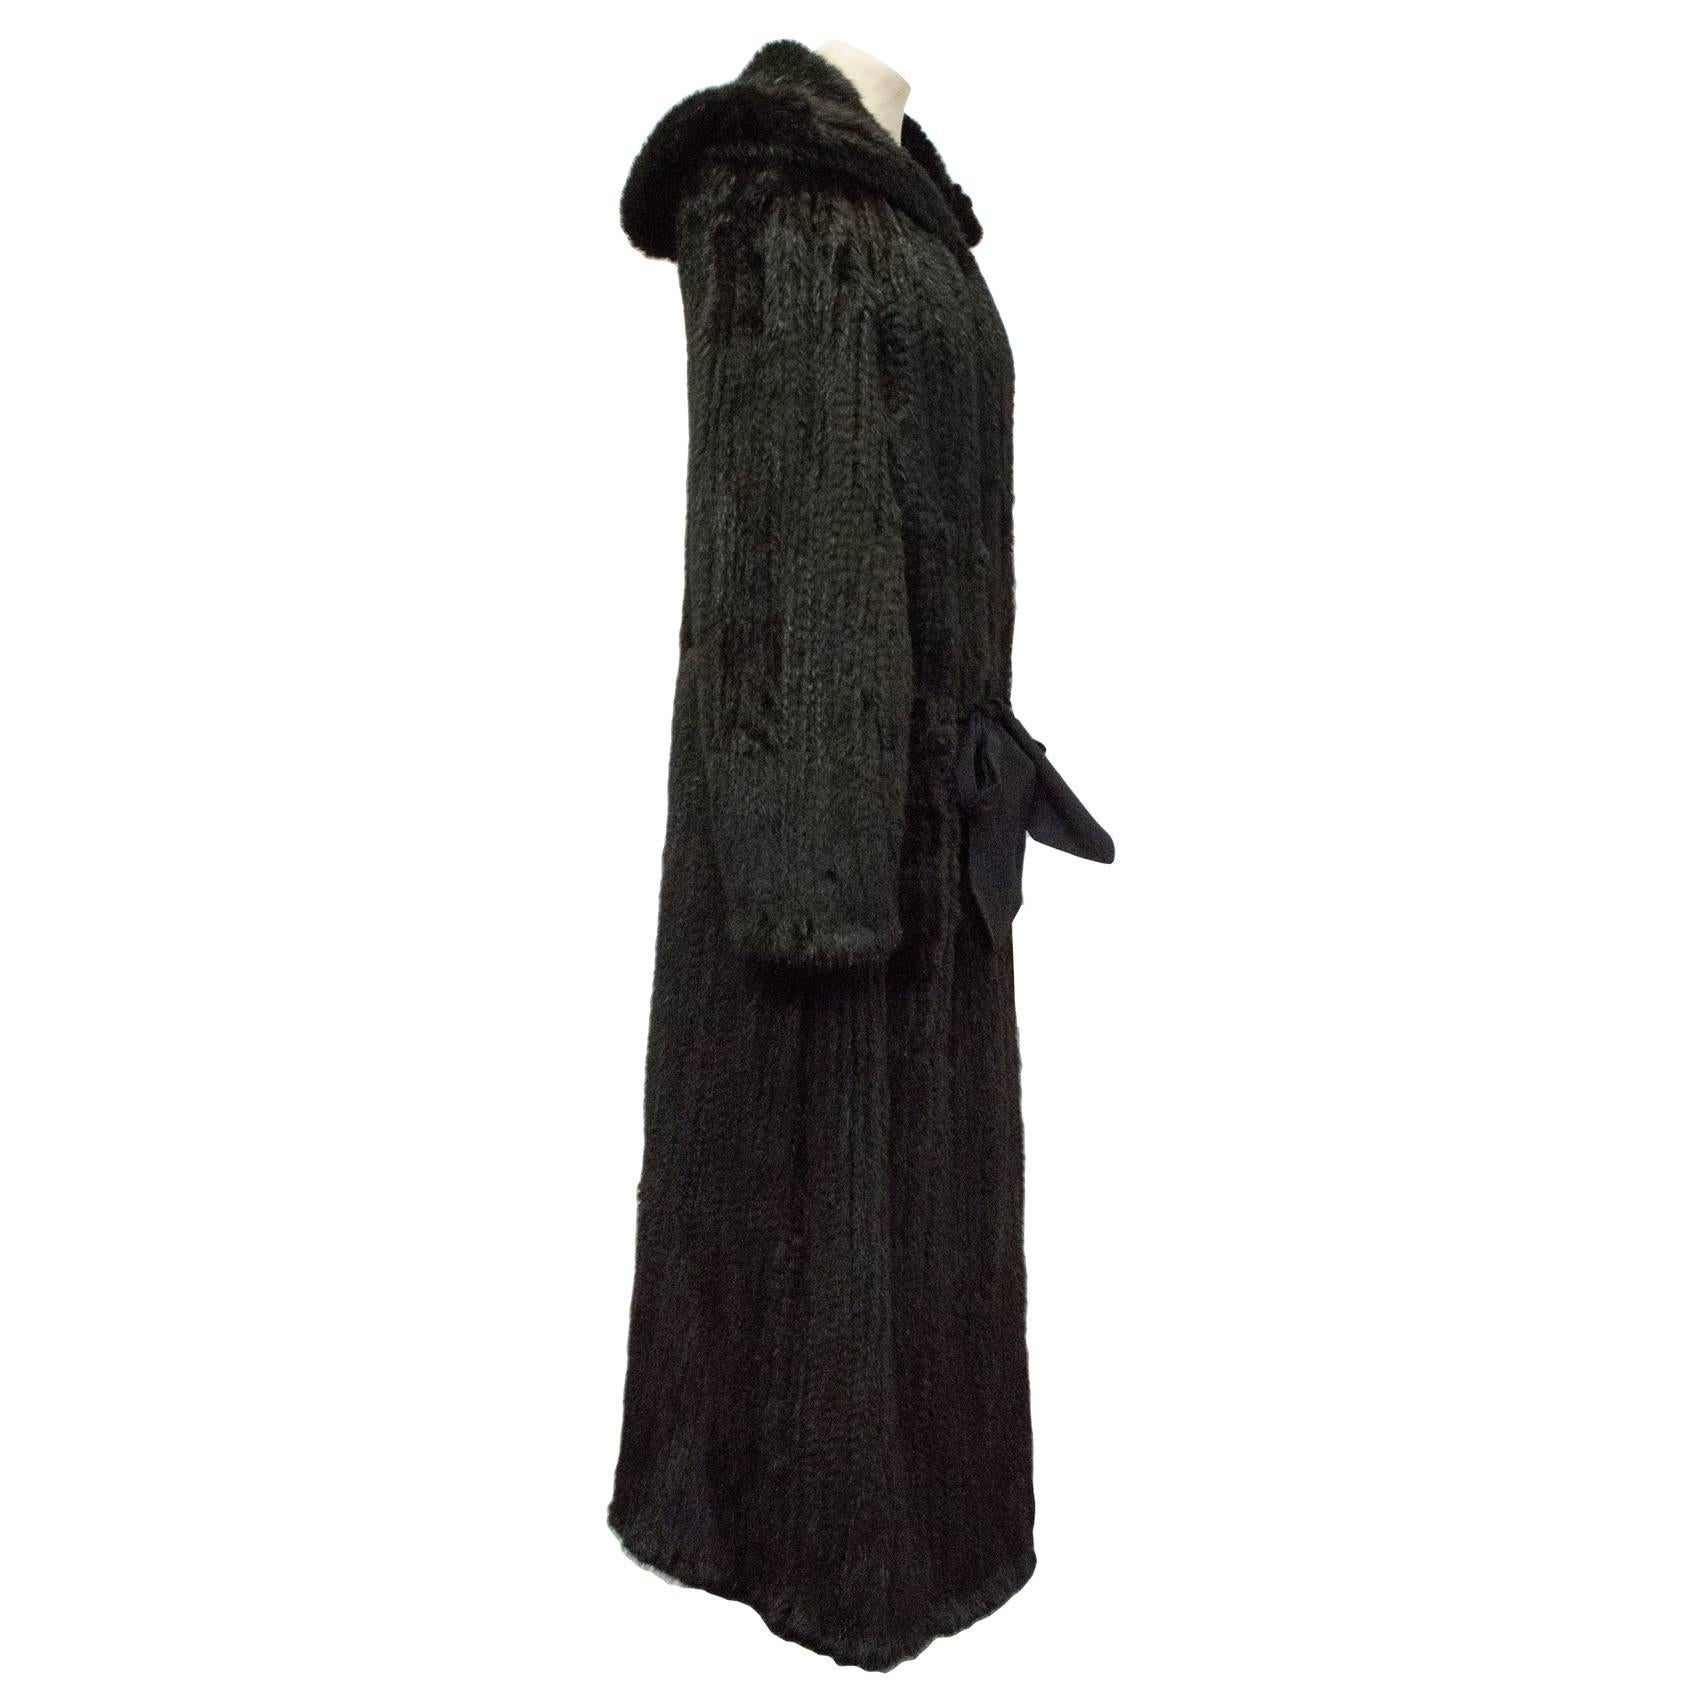 Christian Dior knitted mink fur coat with hood, in an elegant full-length gown-style with tie-up fastening and removable shoulder pads.

Lightweight, stunning and timeless piece.

Please note this item is missing a care label. 

Approx